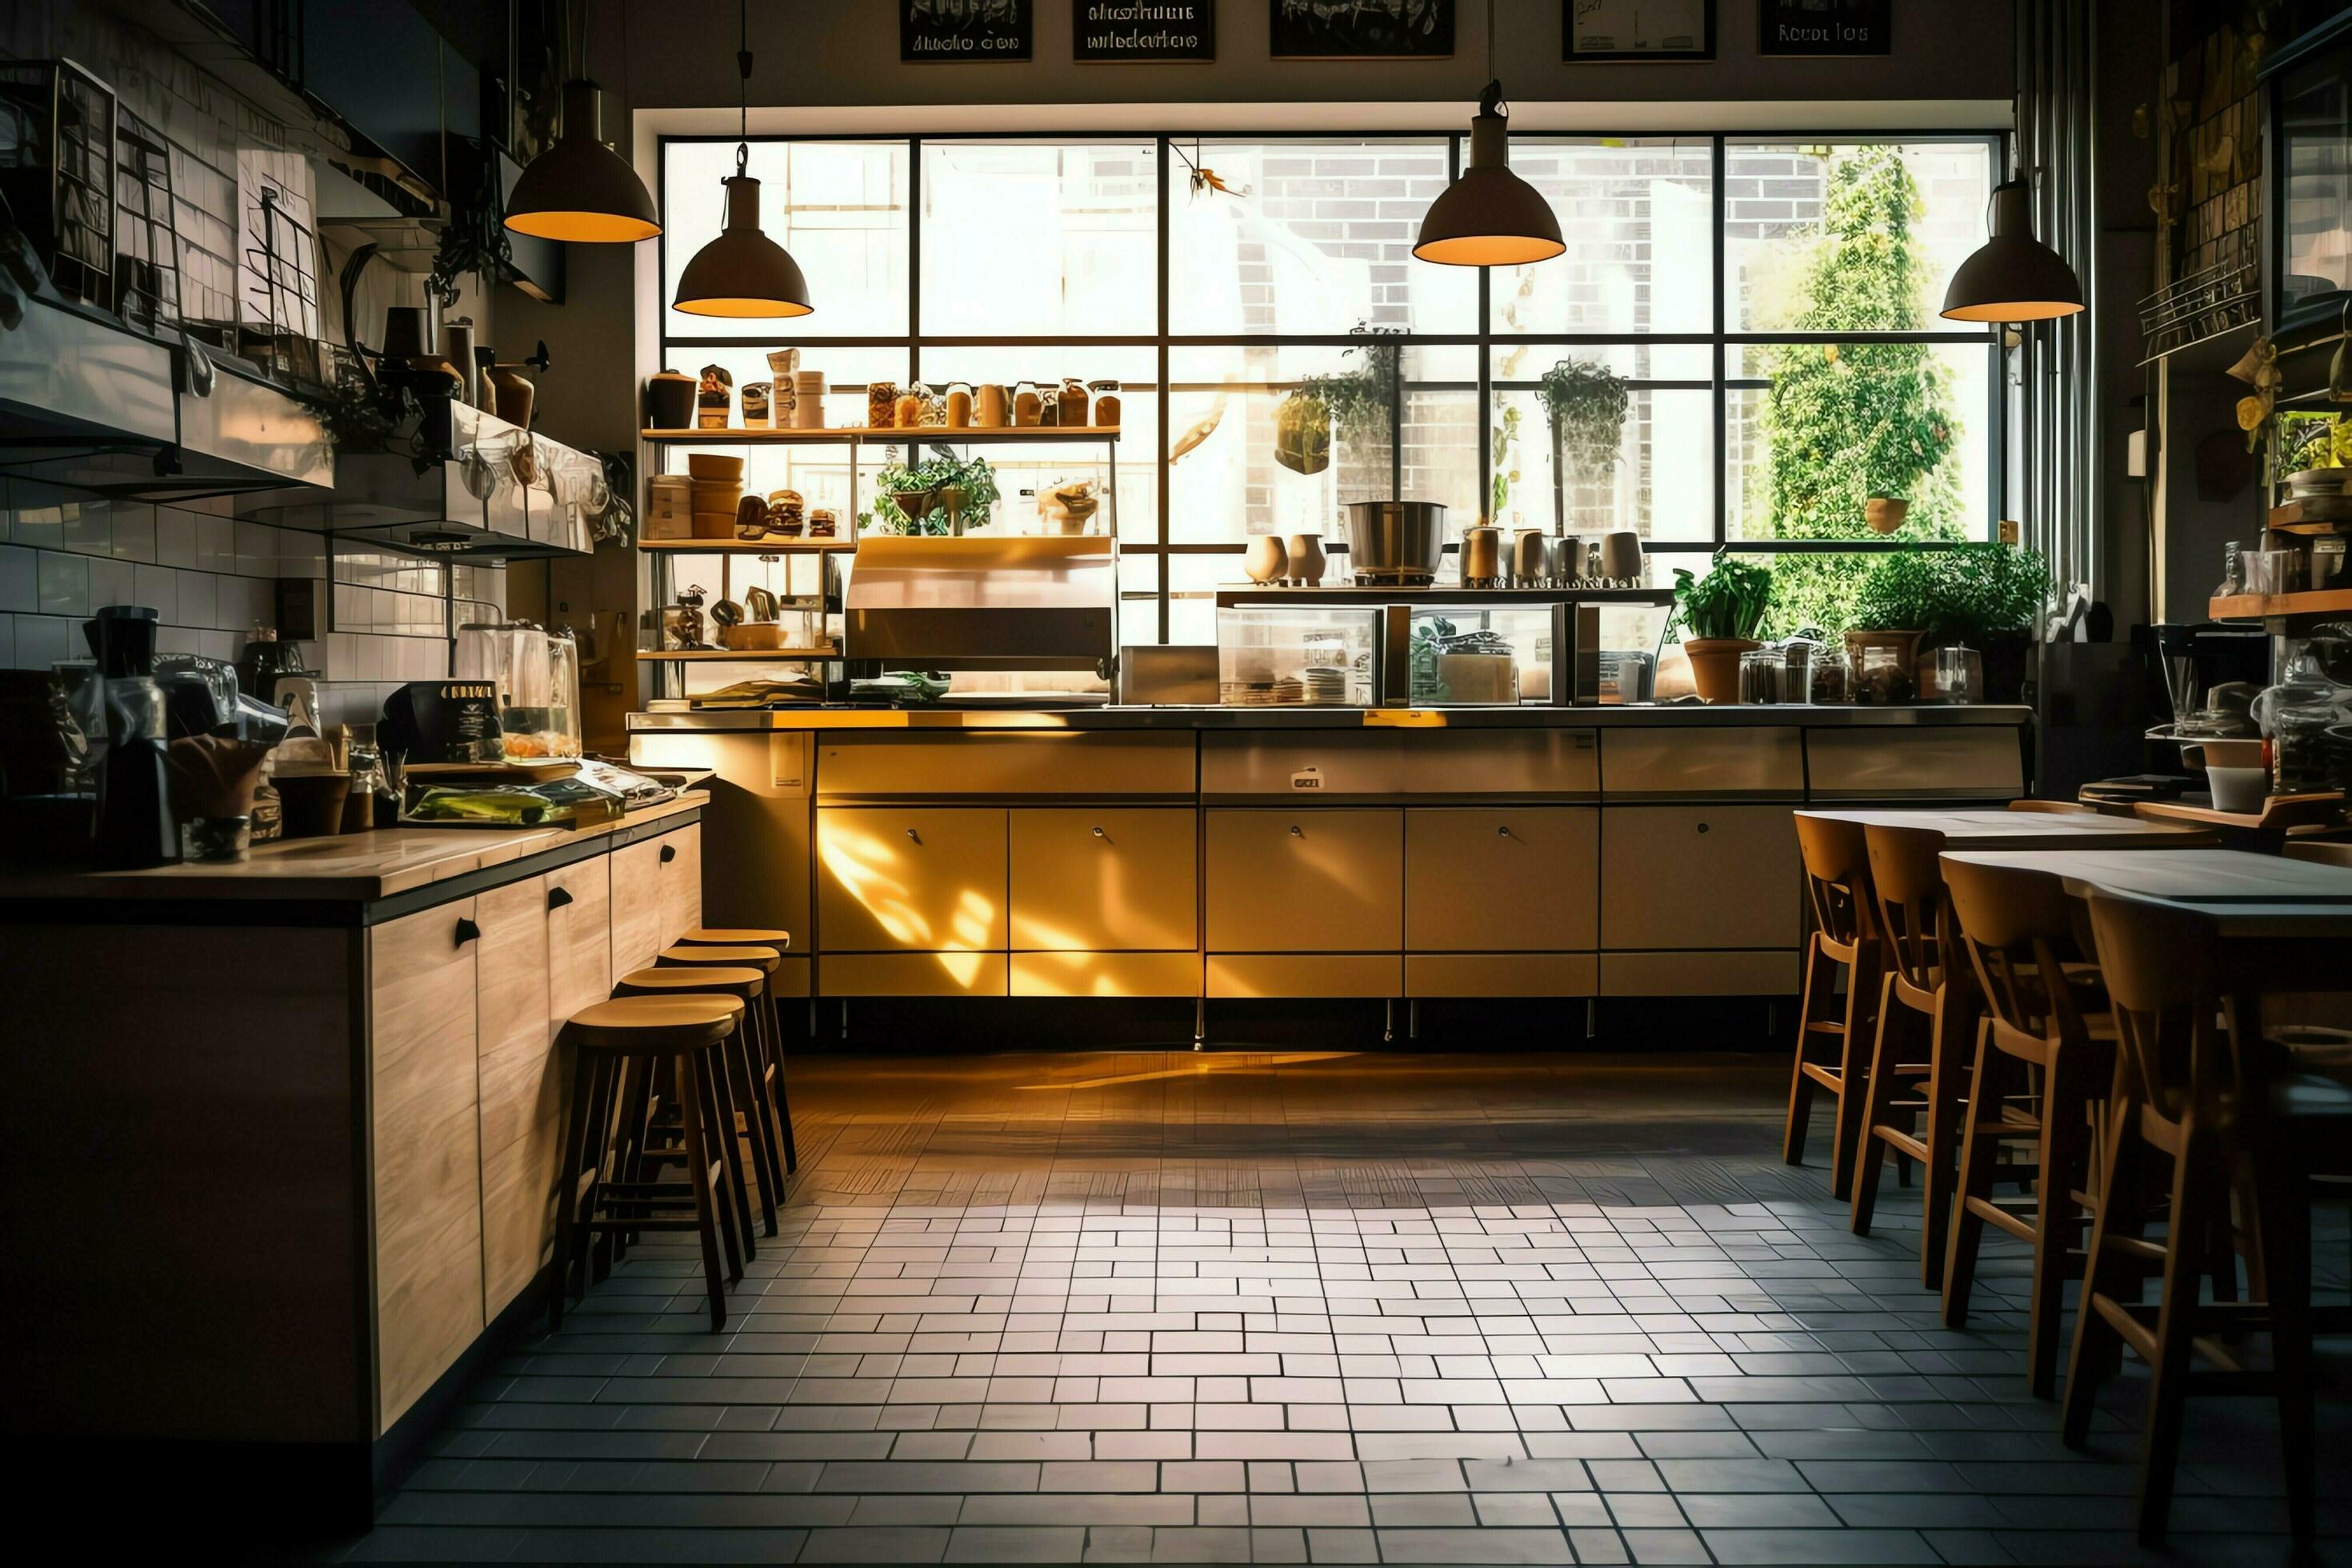 Inside clean kitchen of a modern restaurant or mini cafe with